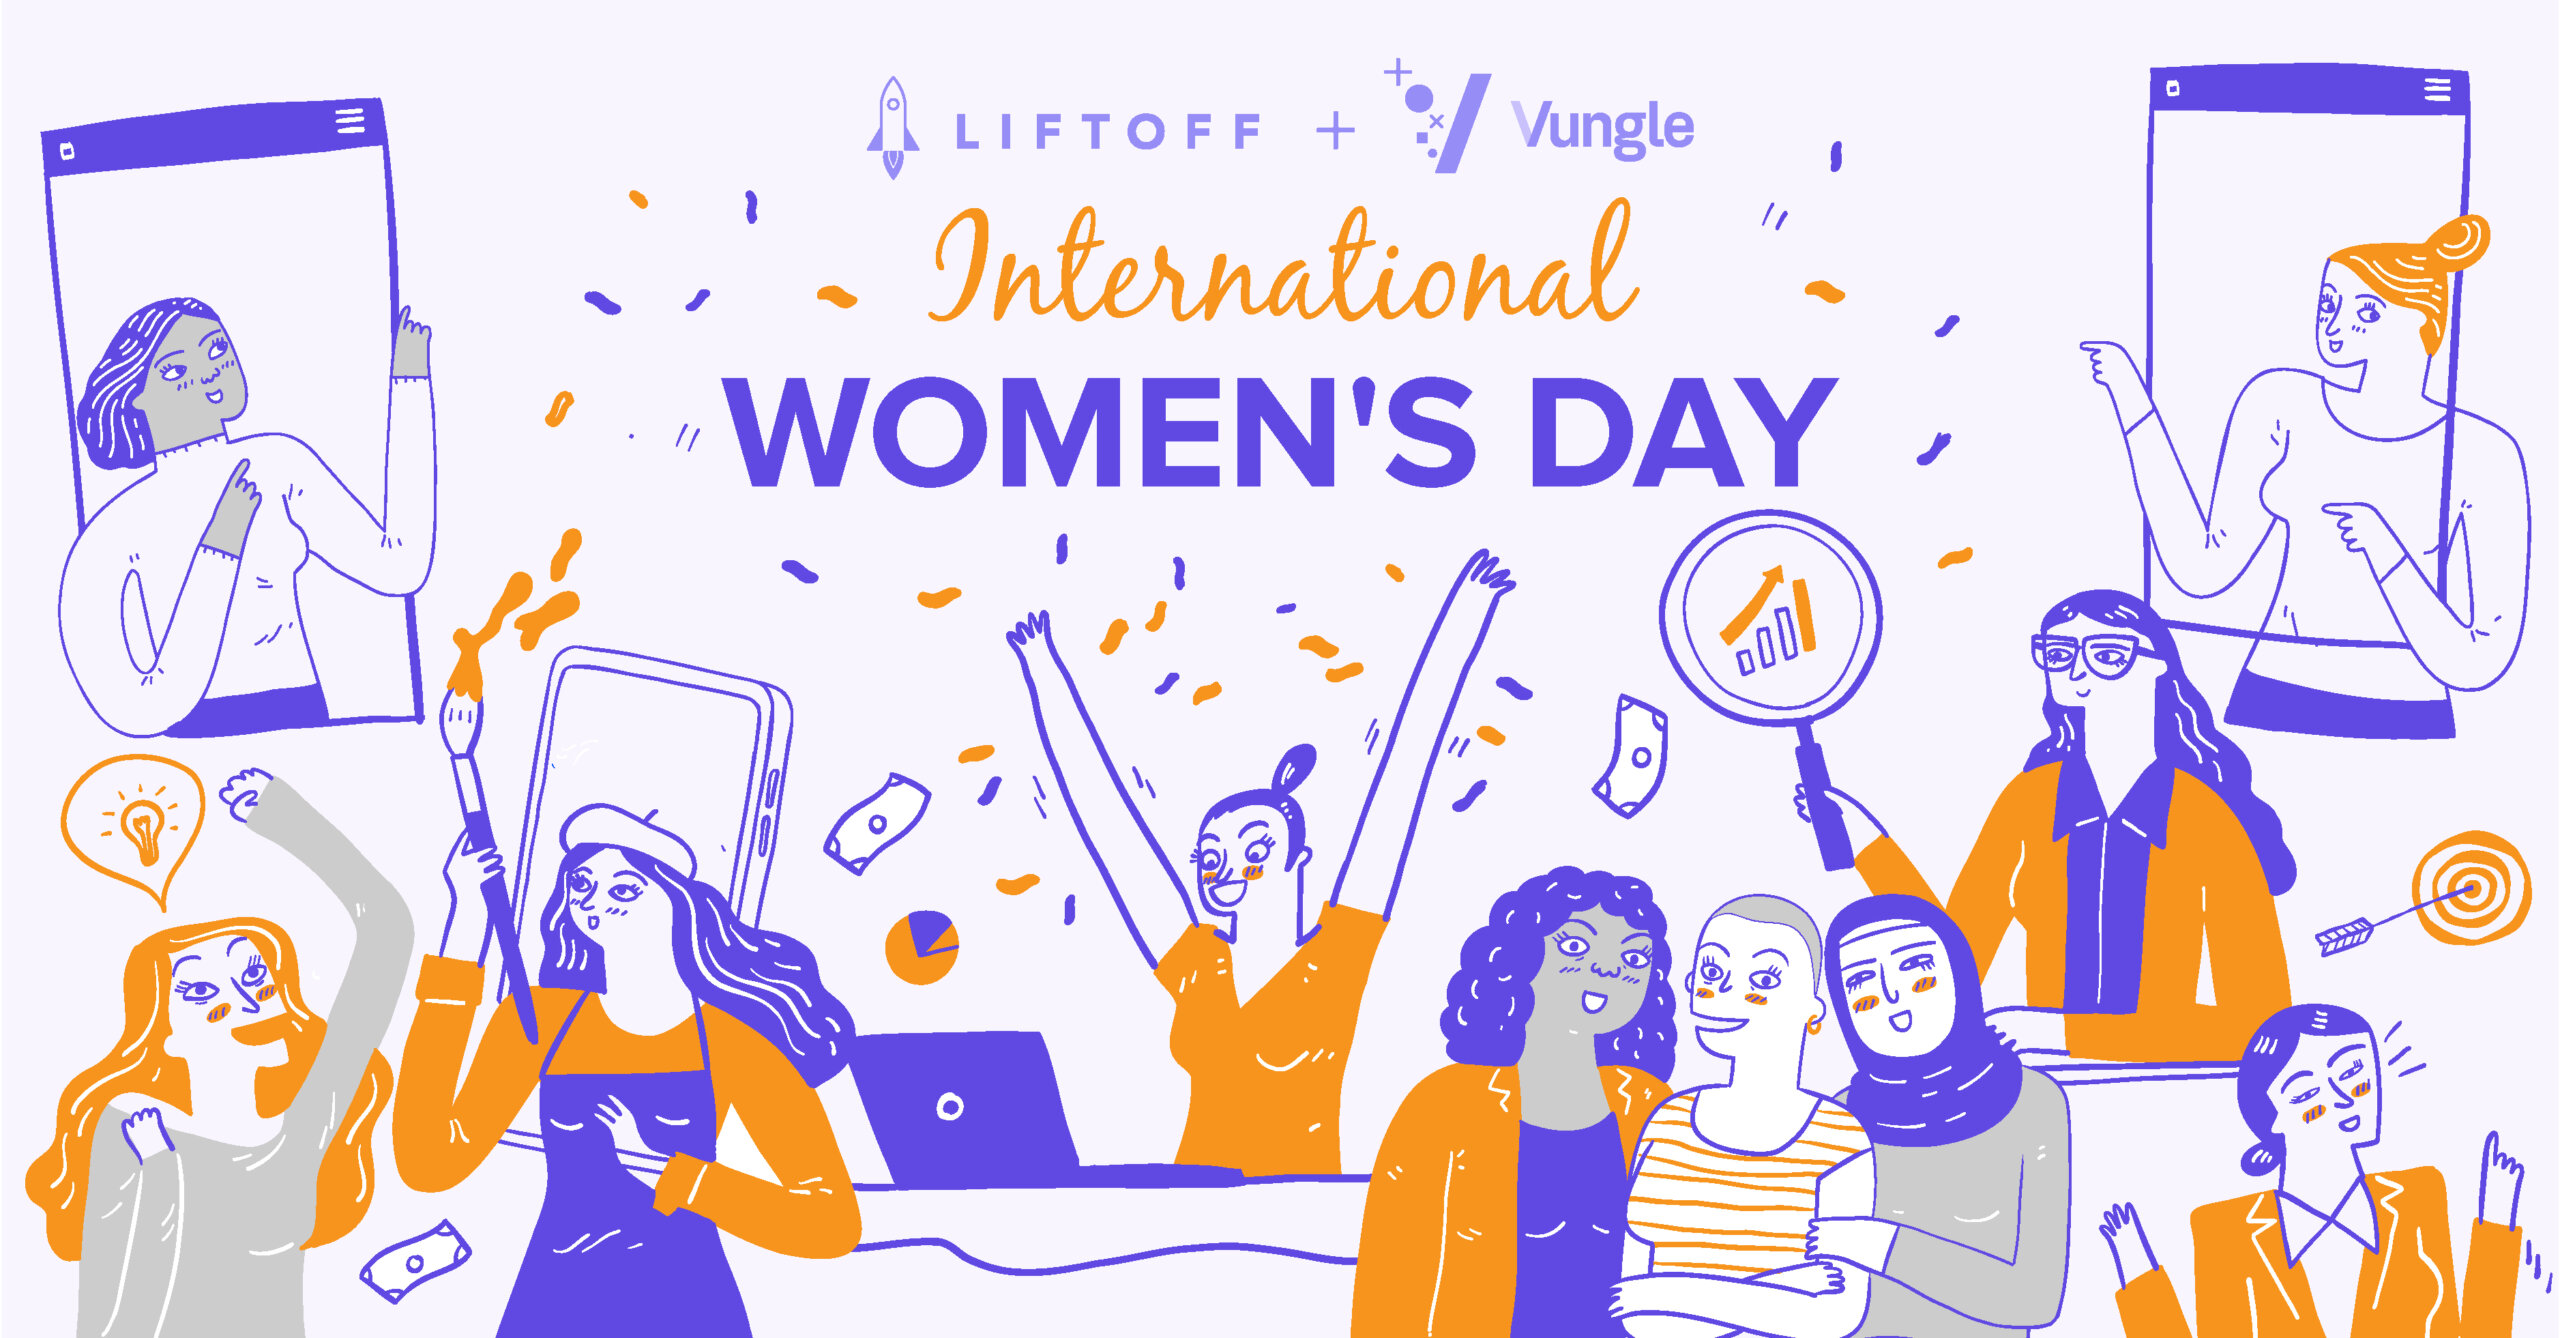 For International Women’s Day, Leading Women in Mobile Share Their Advice